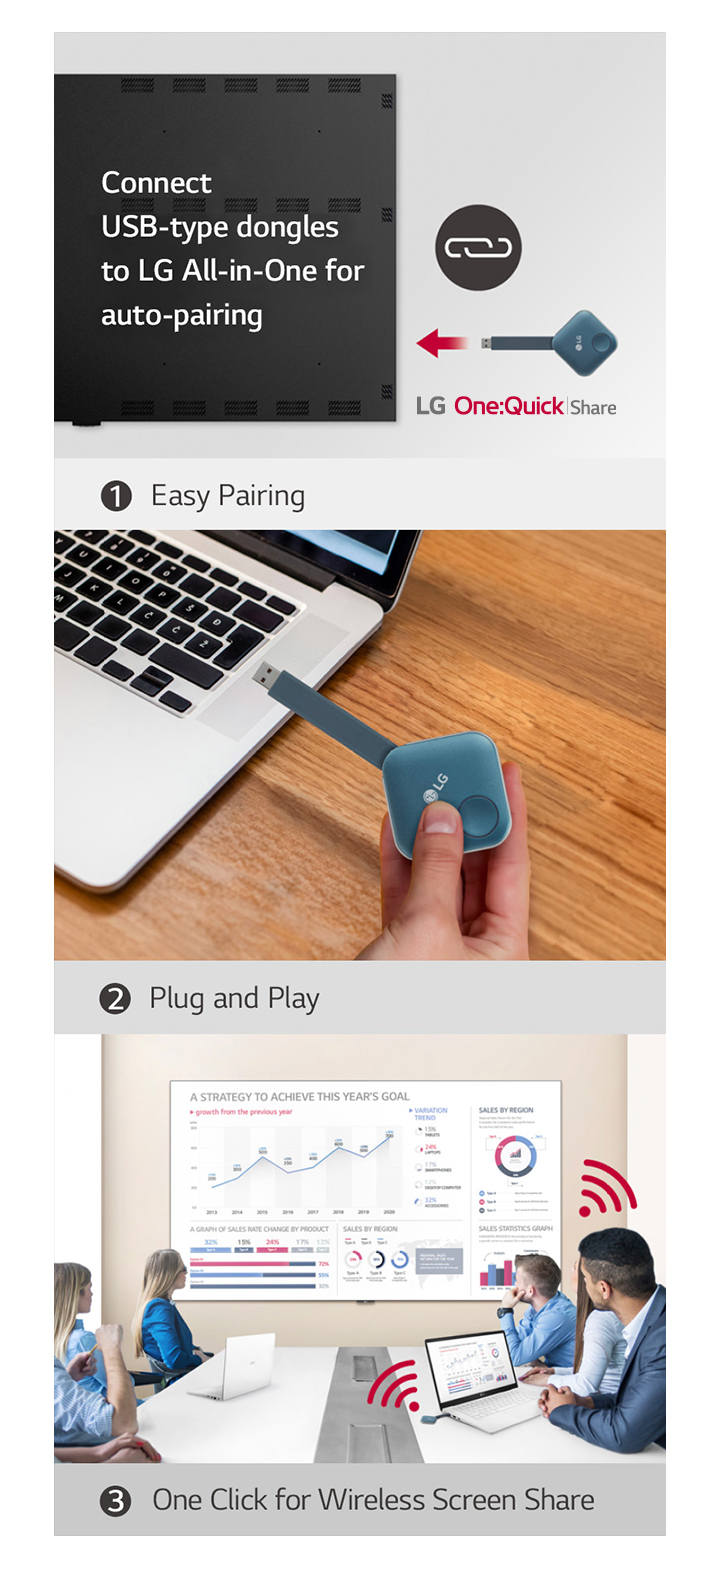 This consist of images displaying the 3-step instructions on installing LG One:Quick Share USB Dongle and sharing the personal screen. The first image pairs the USB Dongle and the LG signage. The second image describes a person holding the USB dongle, attempting to connect it to the PC. The last image consists of people having a meeting by connecting an USB dongle device to a laptop, then sharing the screen through the LAEC on the wall.